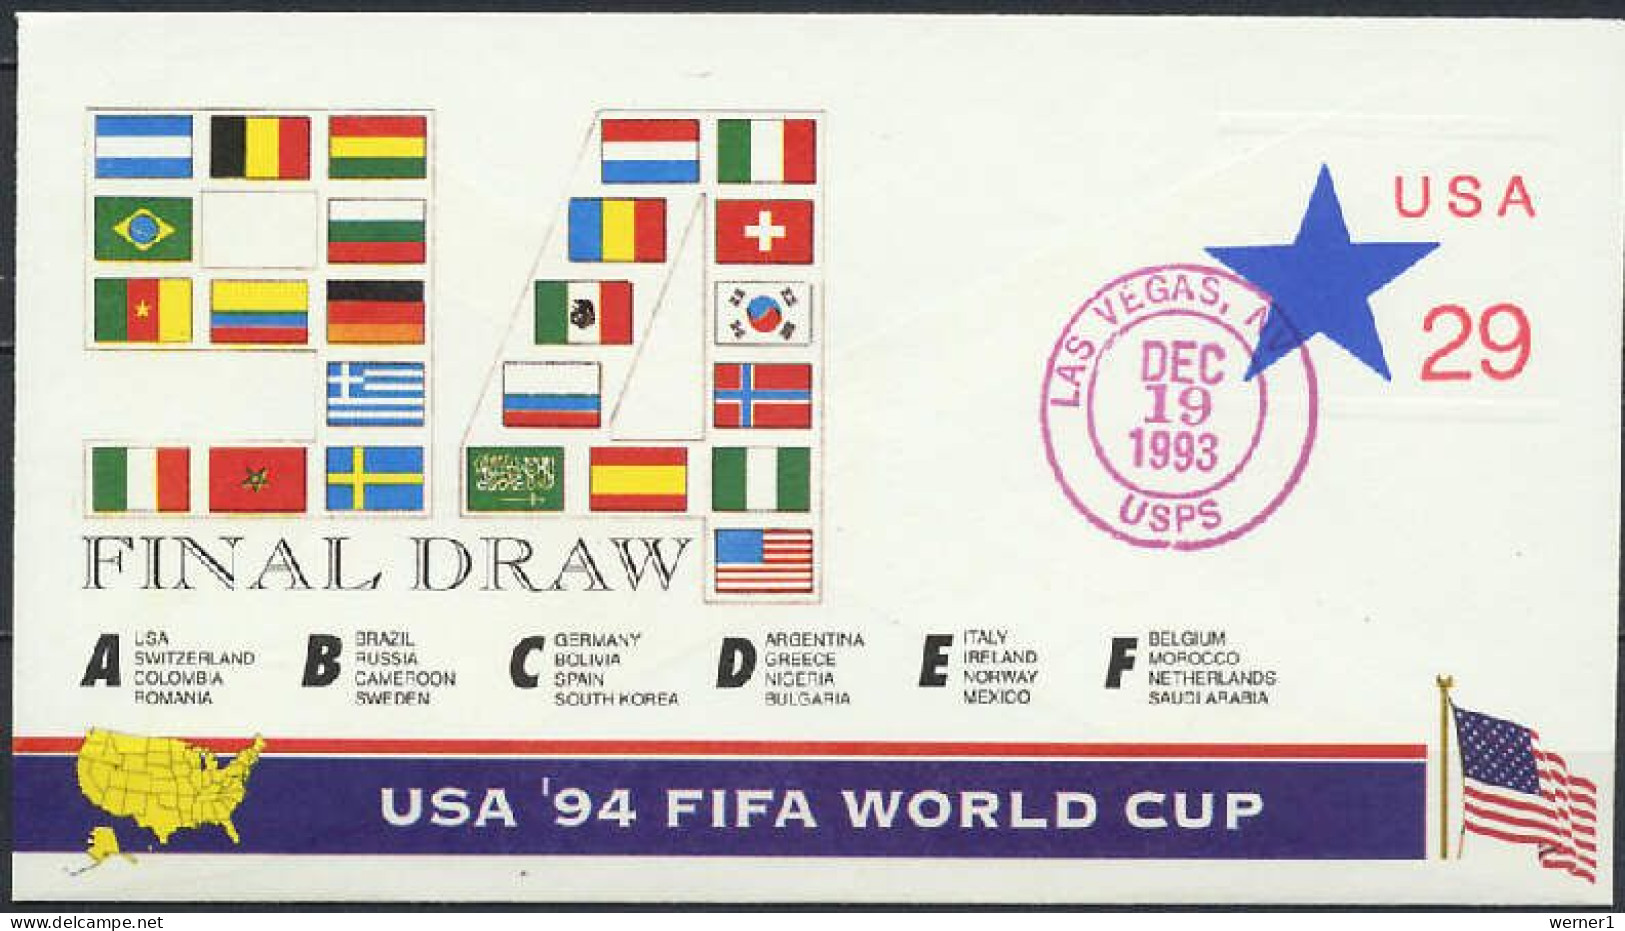 USA 1993 Football Soccer World Cup Commemorative Cover Final Draw - 1994 – Verenigde Staten